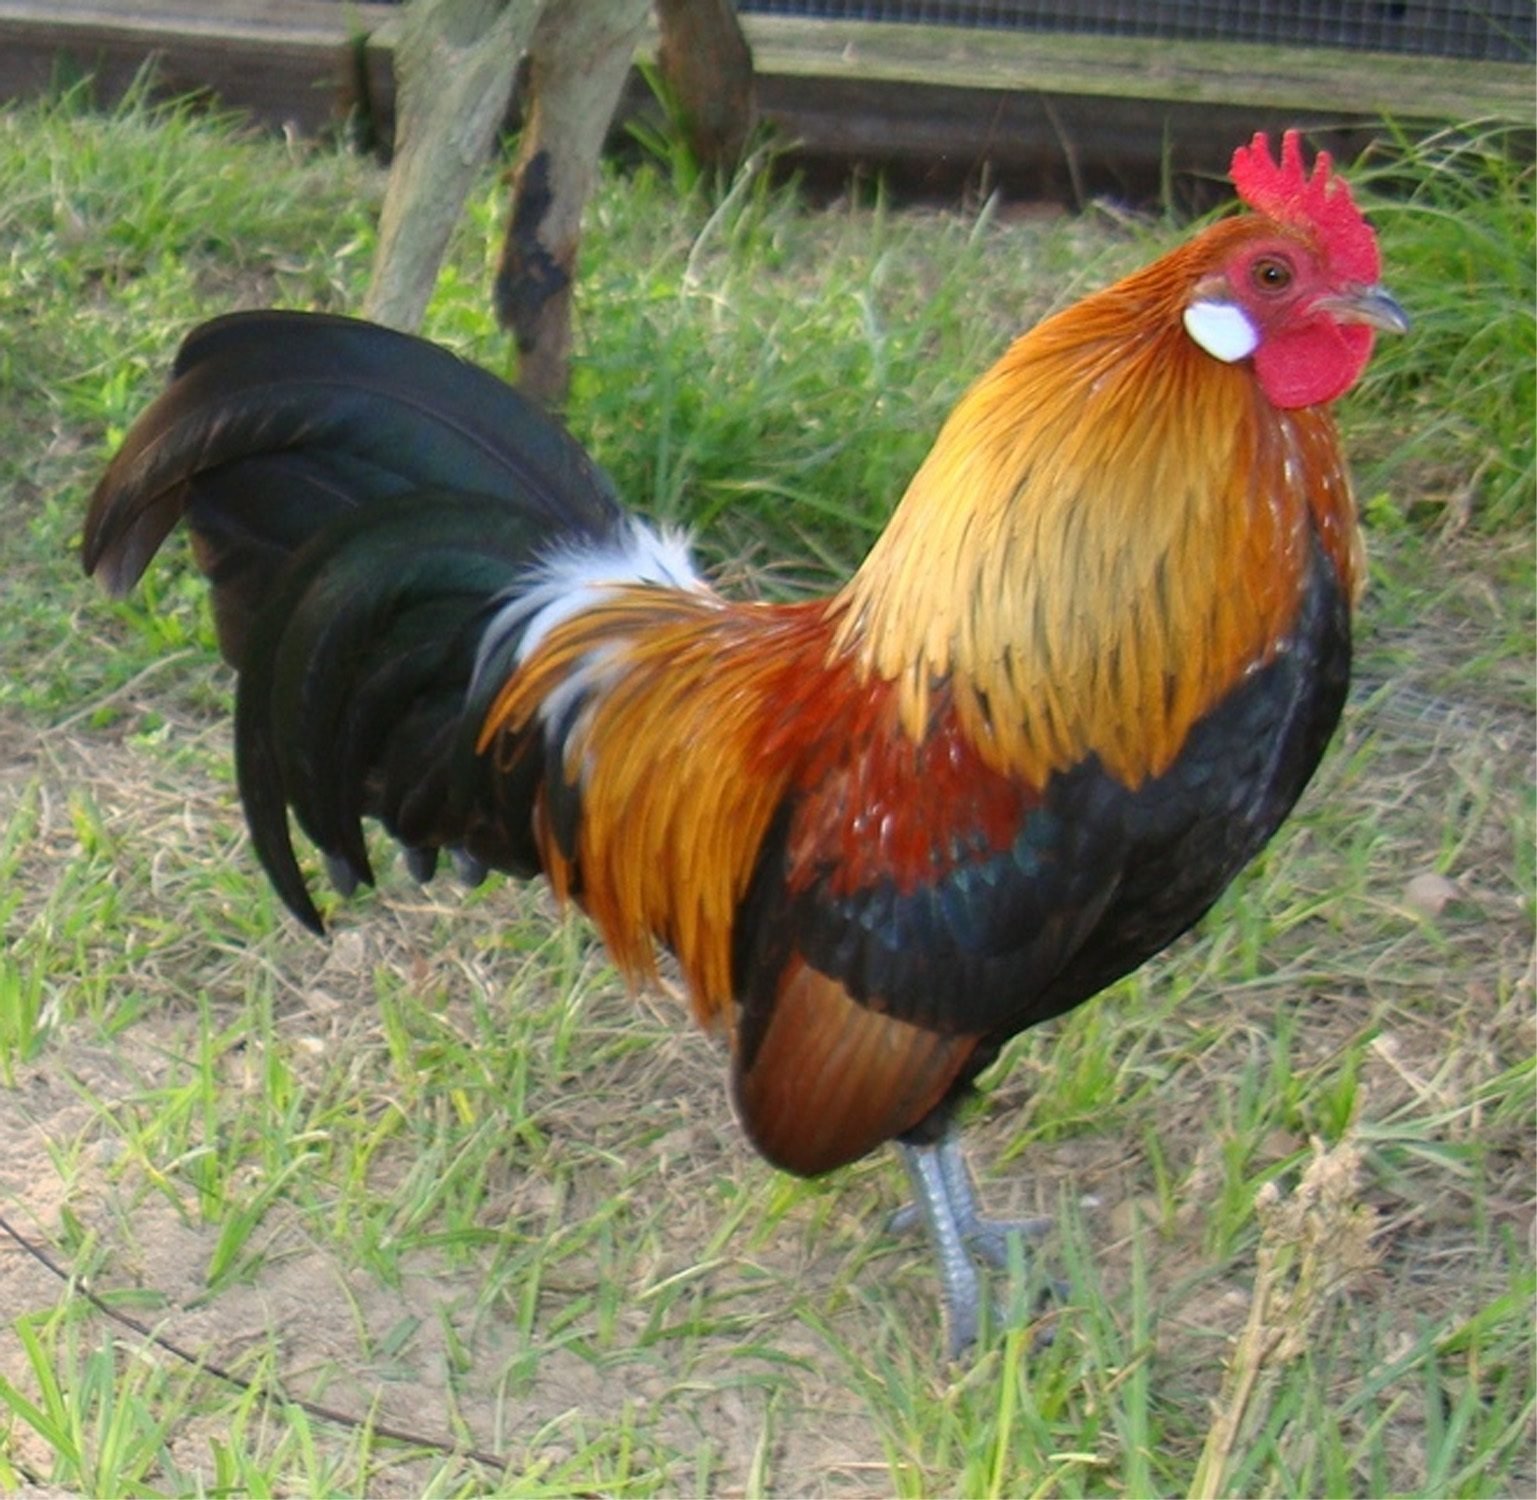 List 100+ Pictures Images Of Bantam Chickens Updated